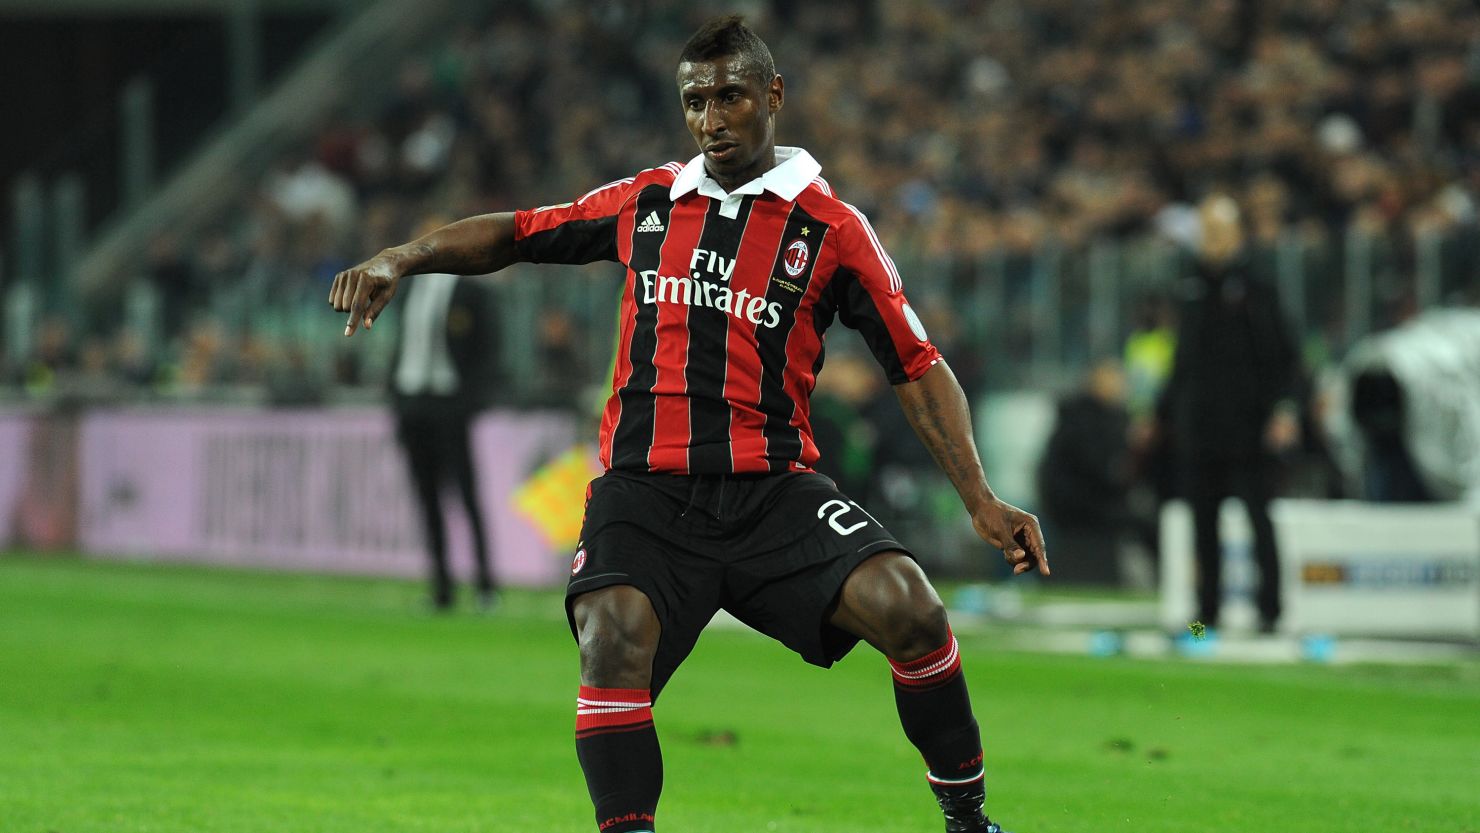 AC Milan defender Kevin Constant was allegedly racially abused during his side's friendly game against Sassuolo.